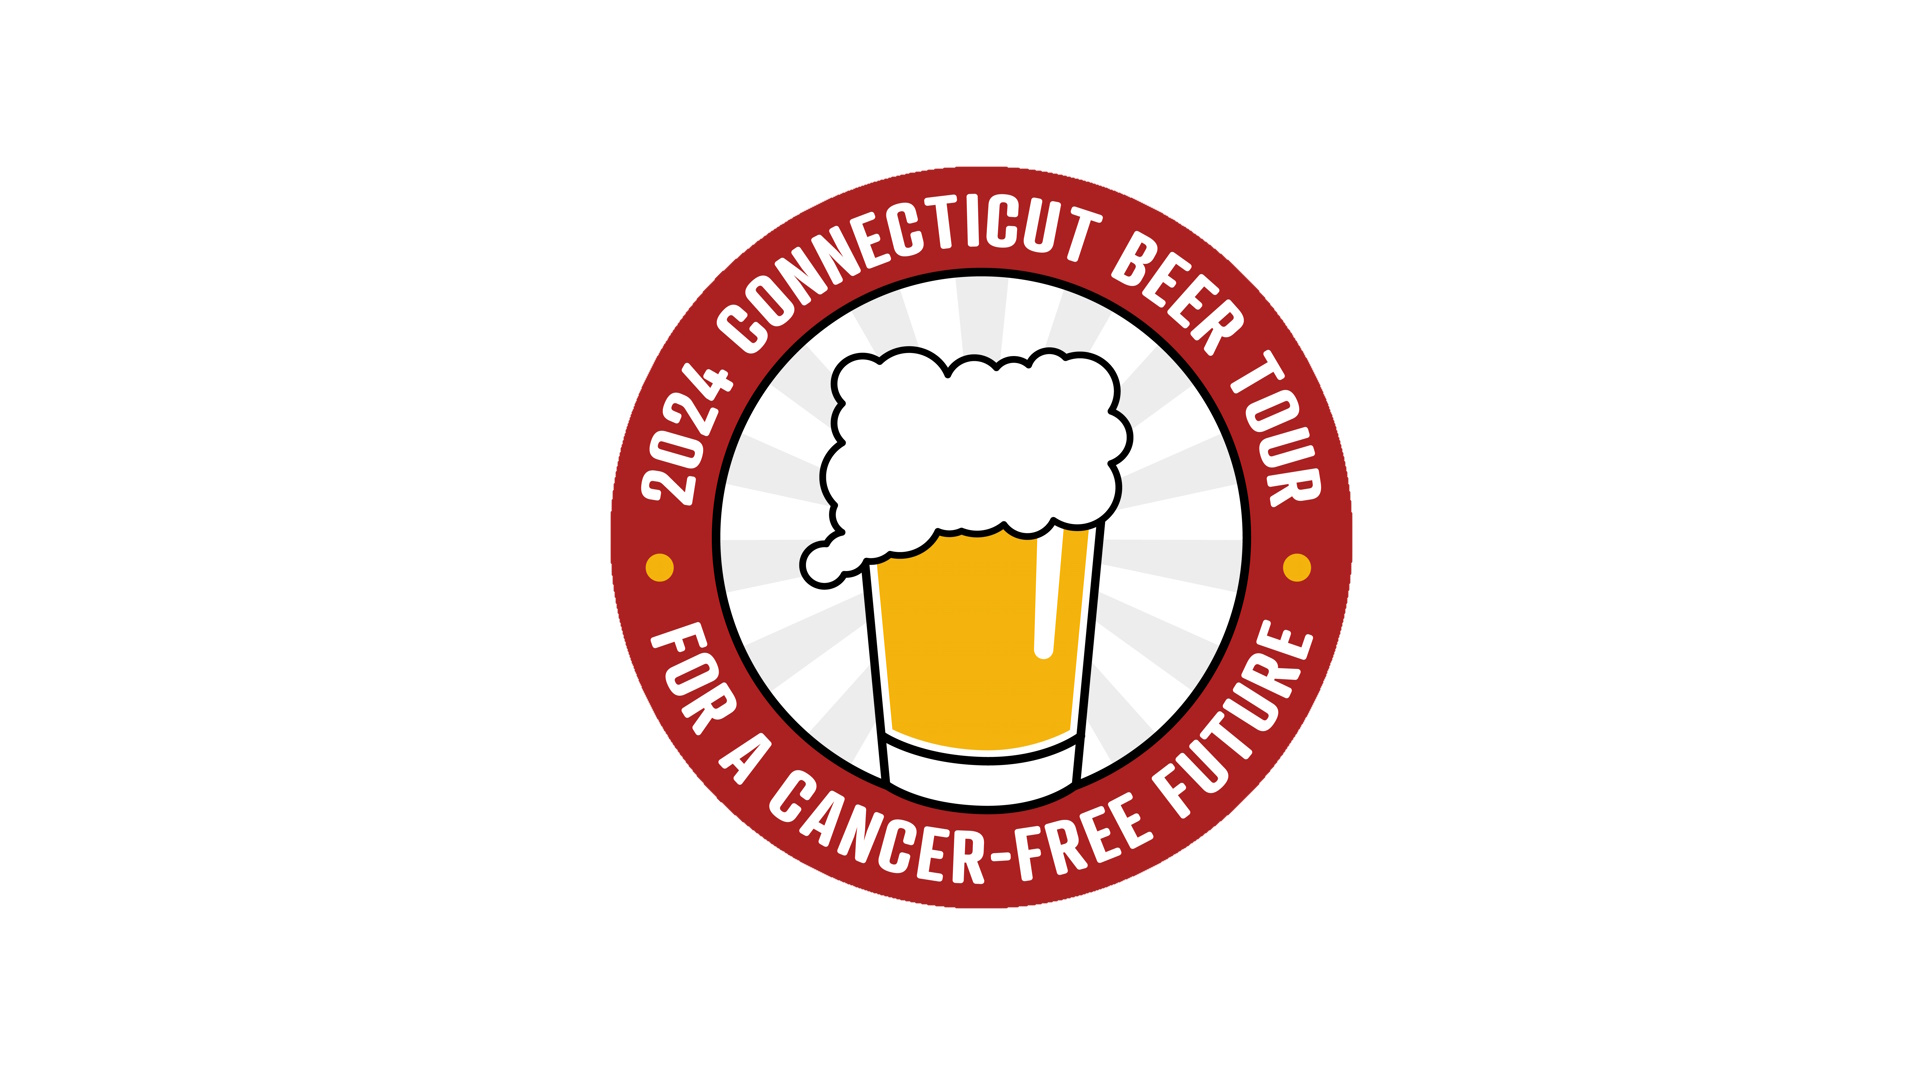 Ct beer tour for a cancer free future